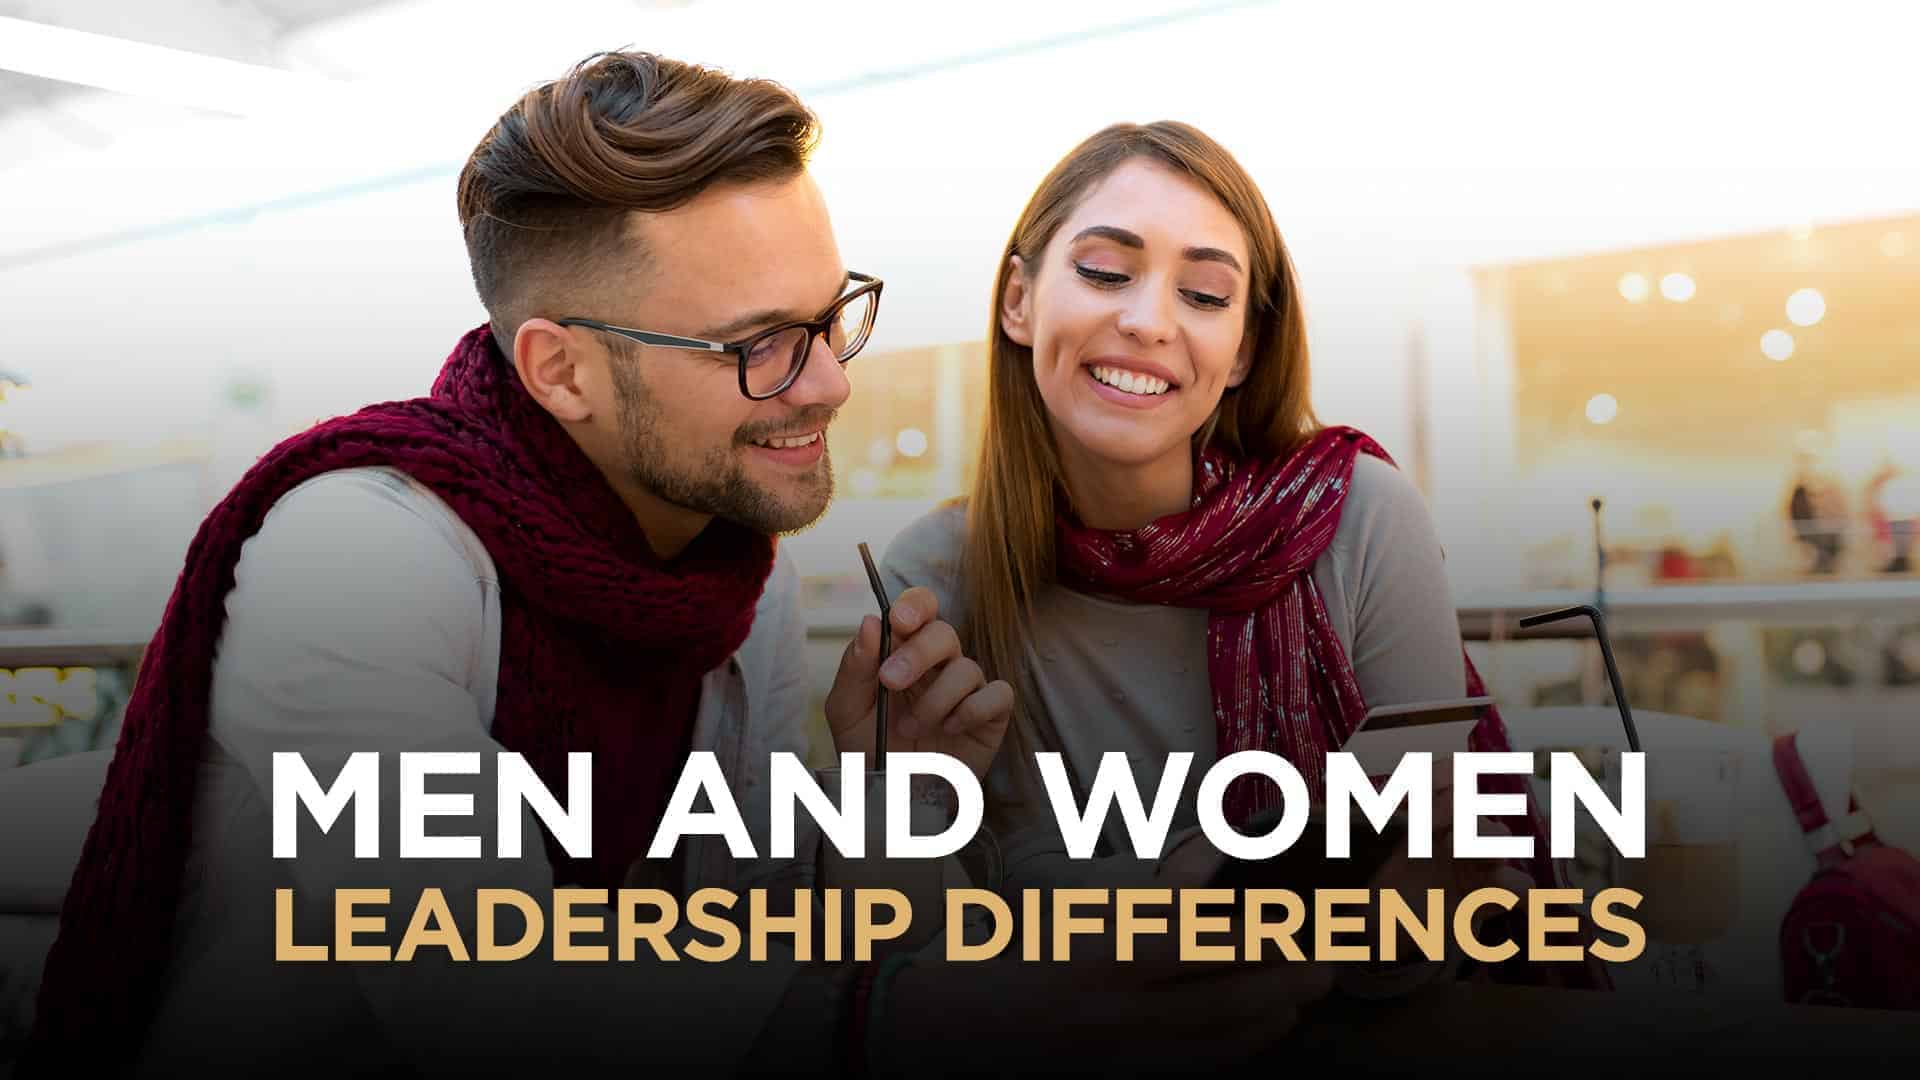 How-The-Leadership-Differences-Between-Men-and-Women-Are-Evolving-Today